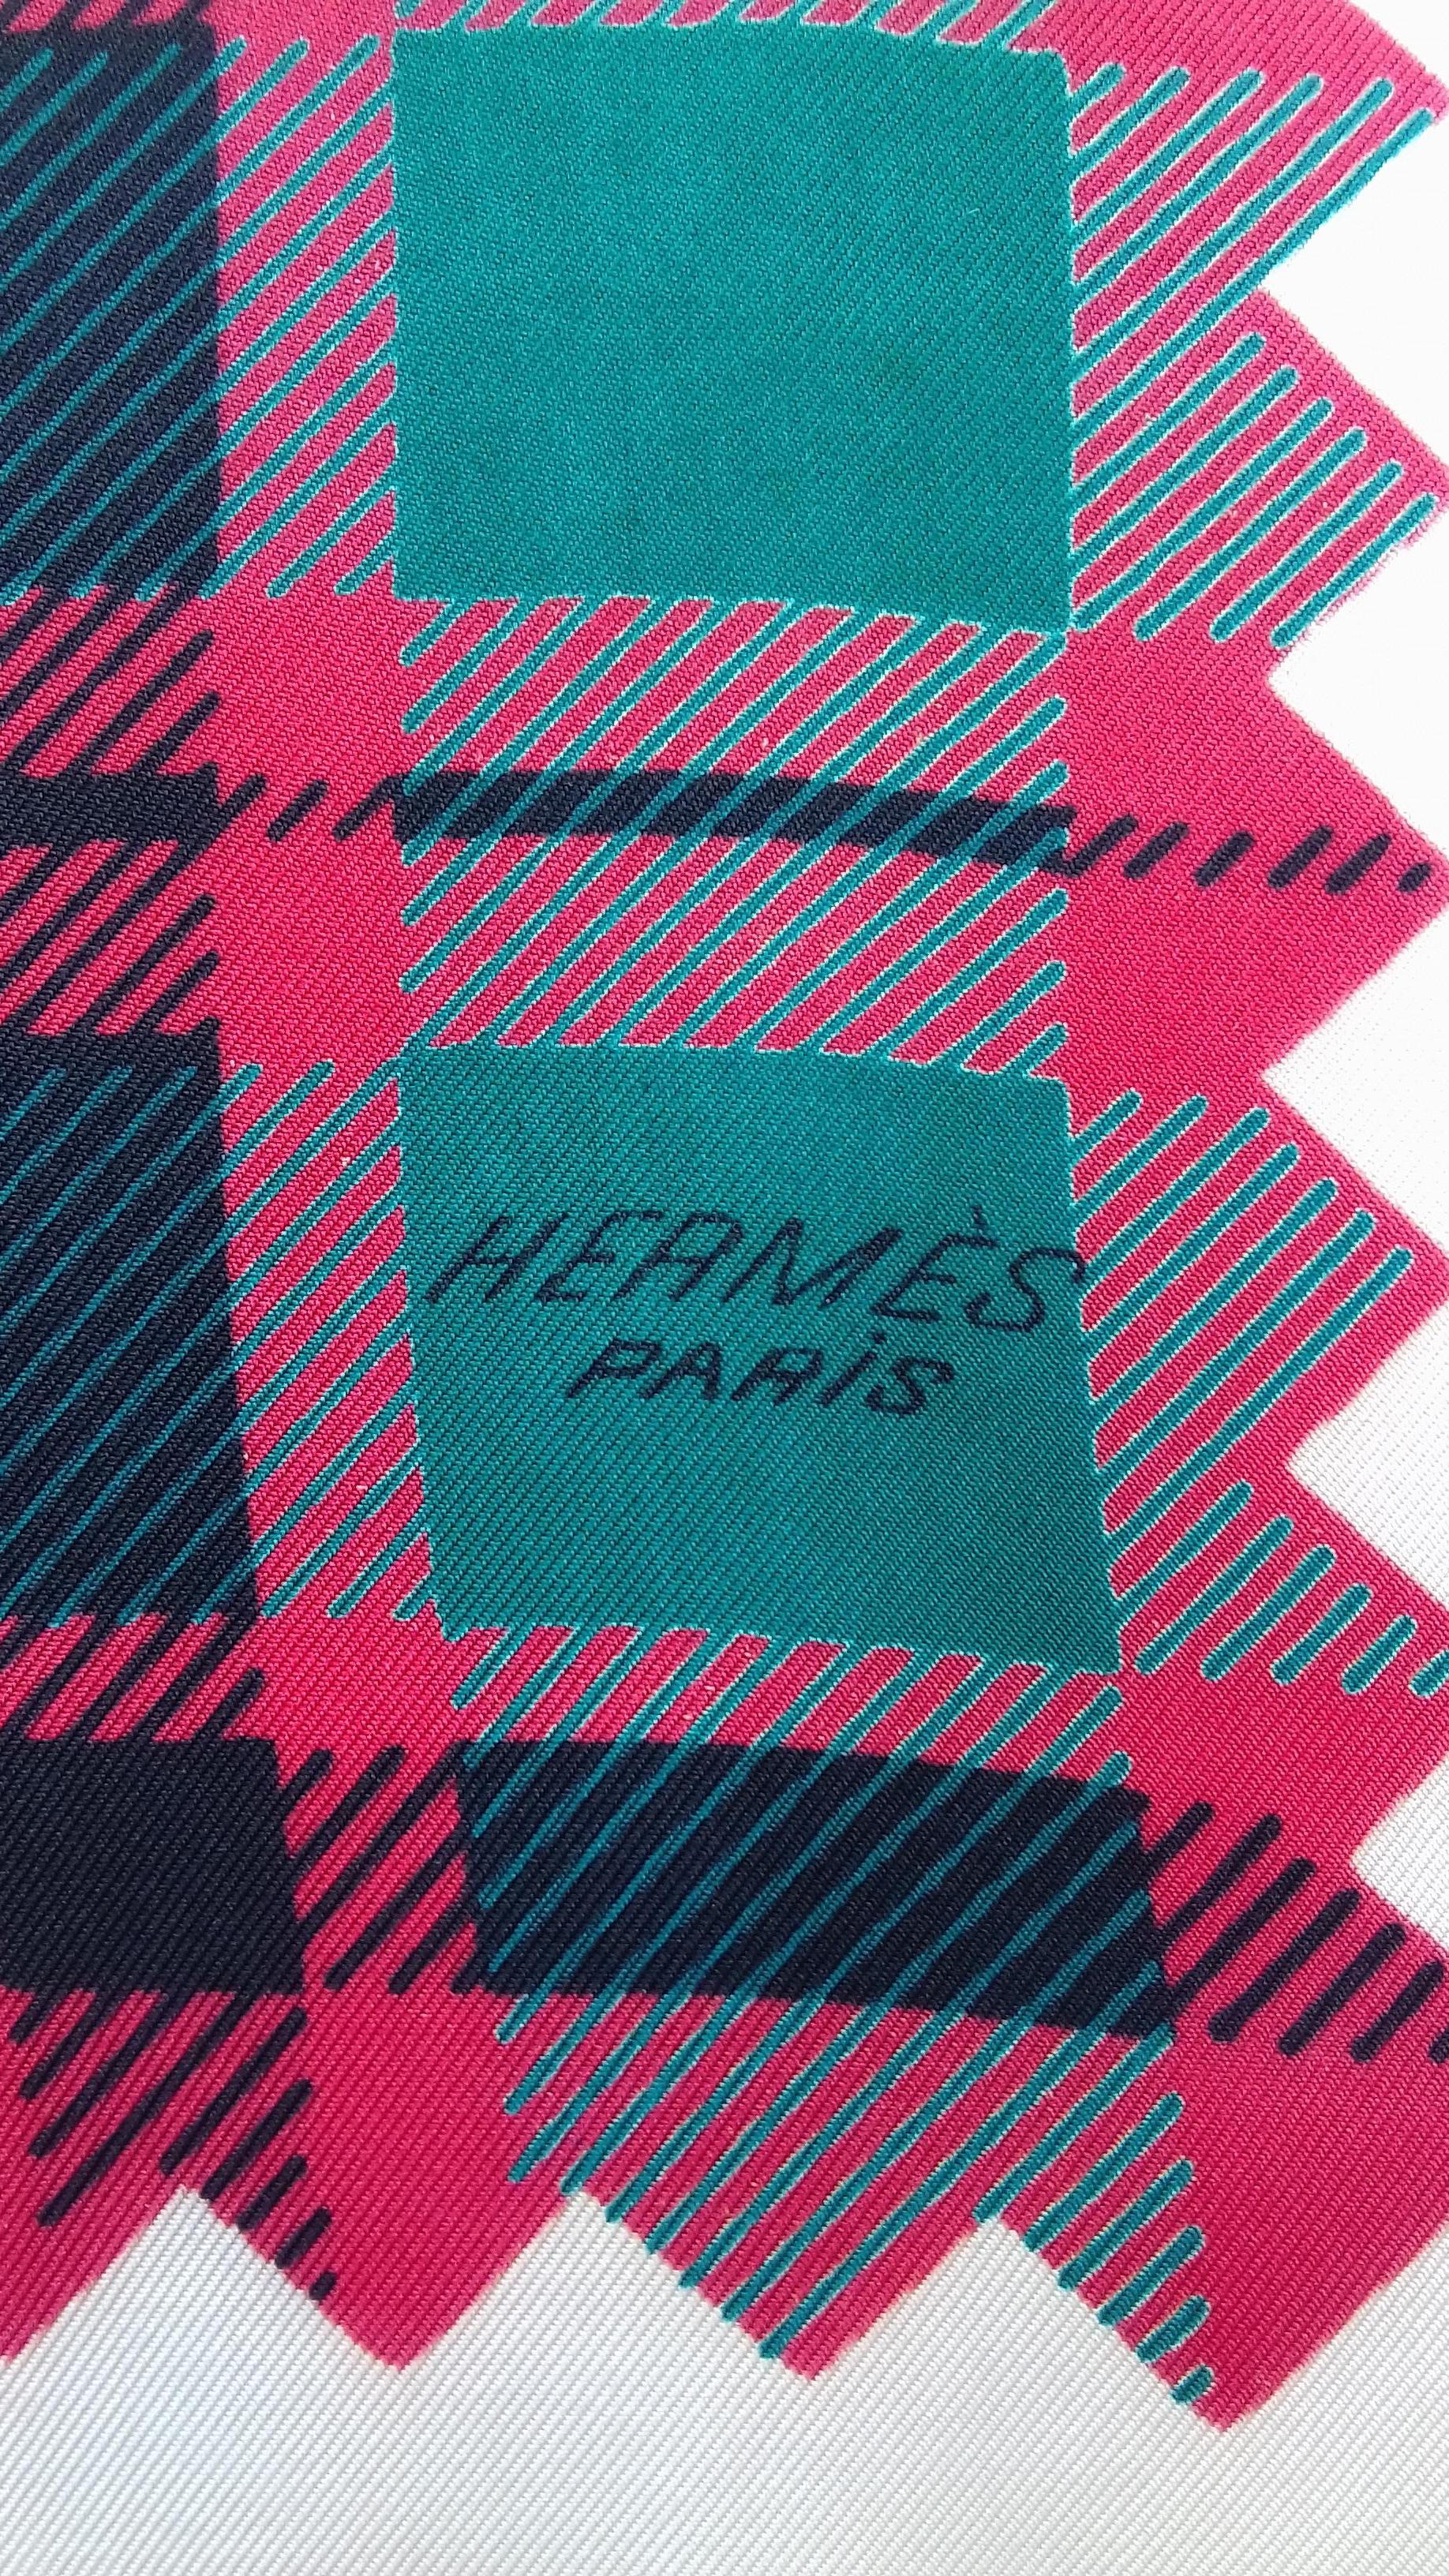 Extremely Rare Authentic Hermès Scarf

Pattern: 